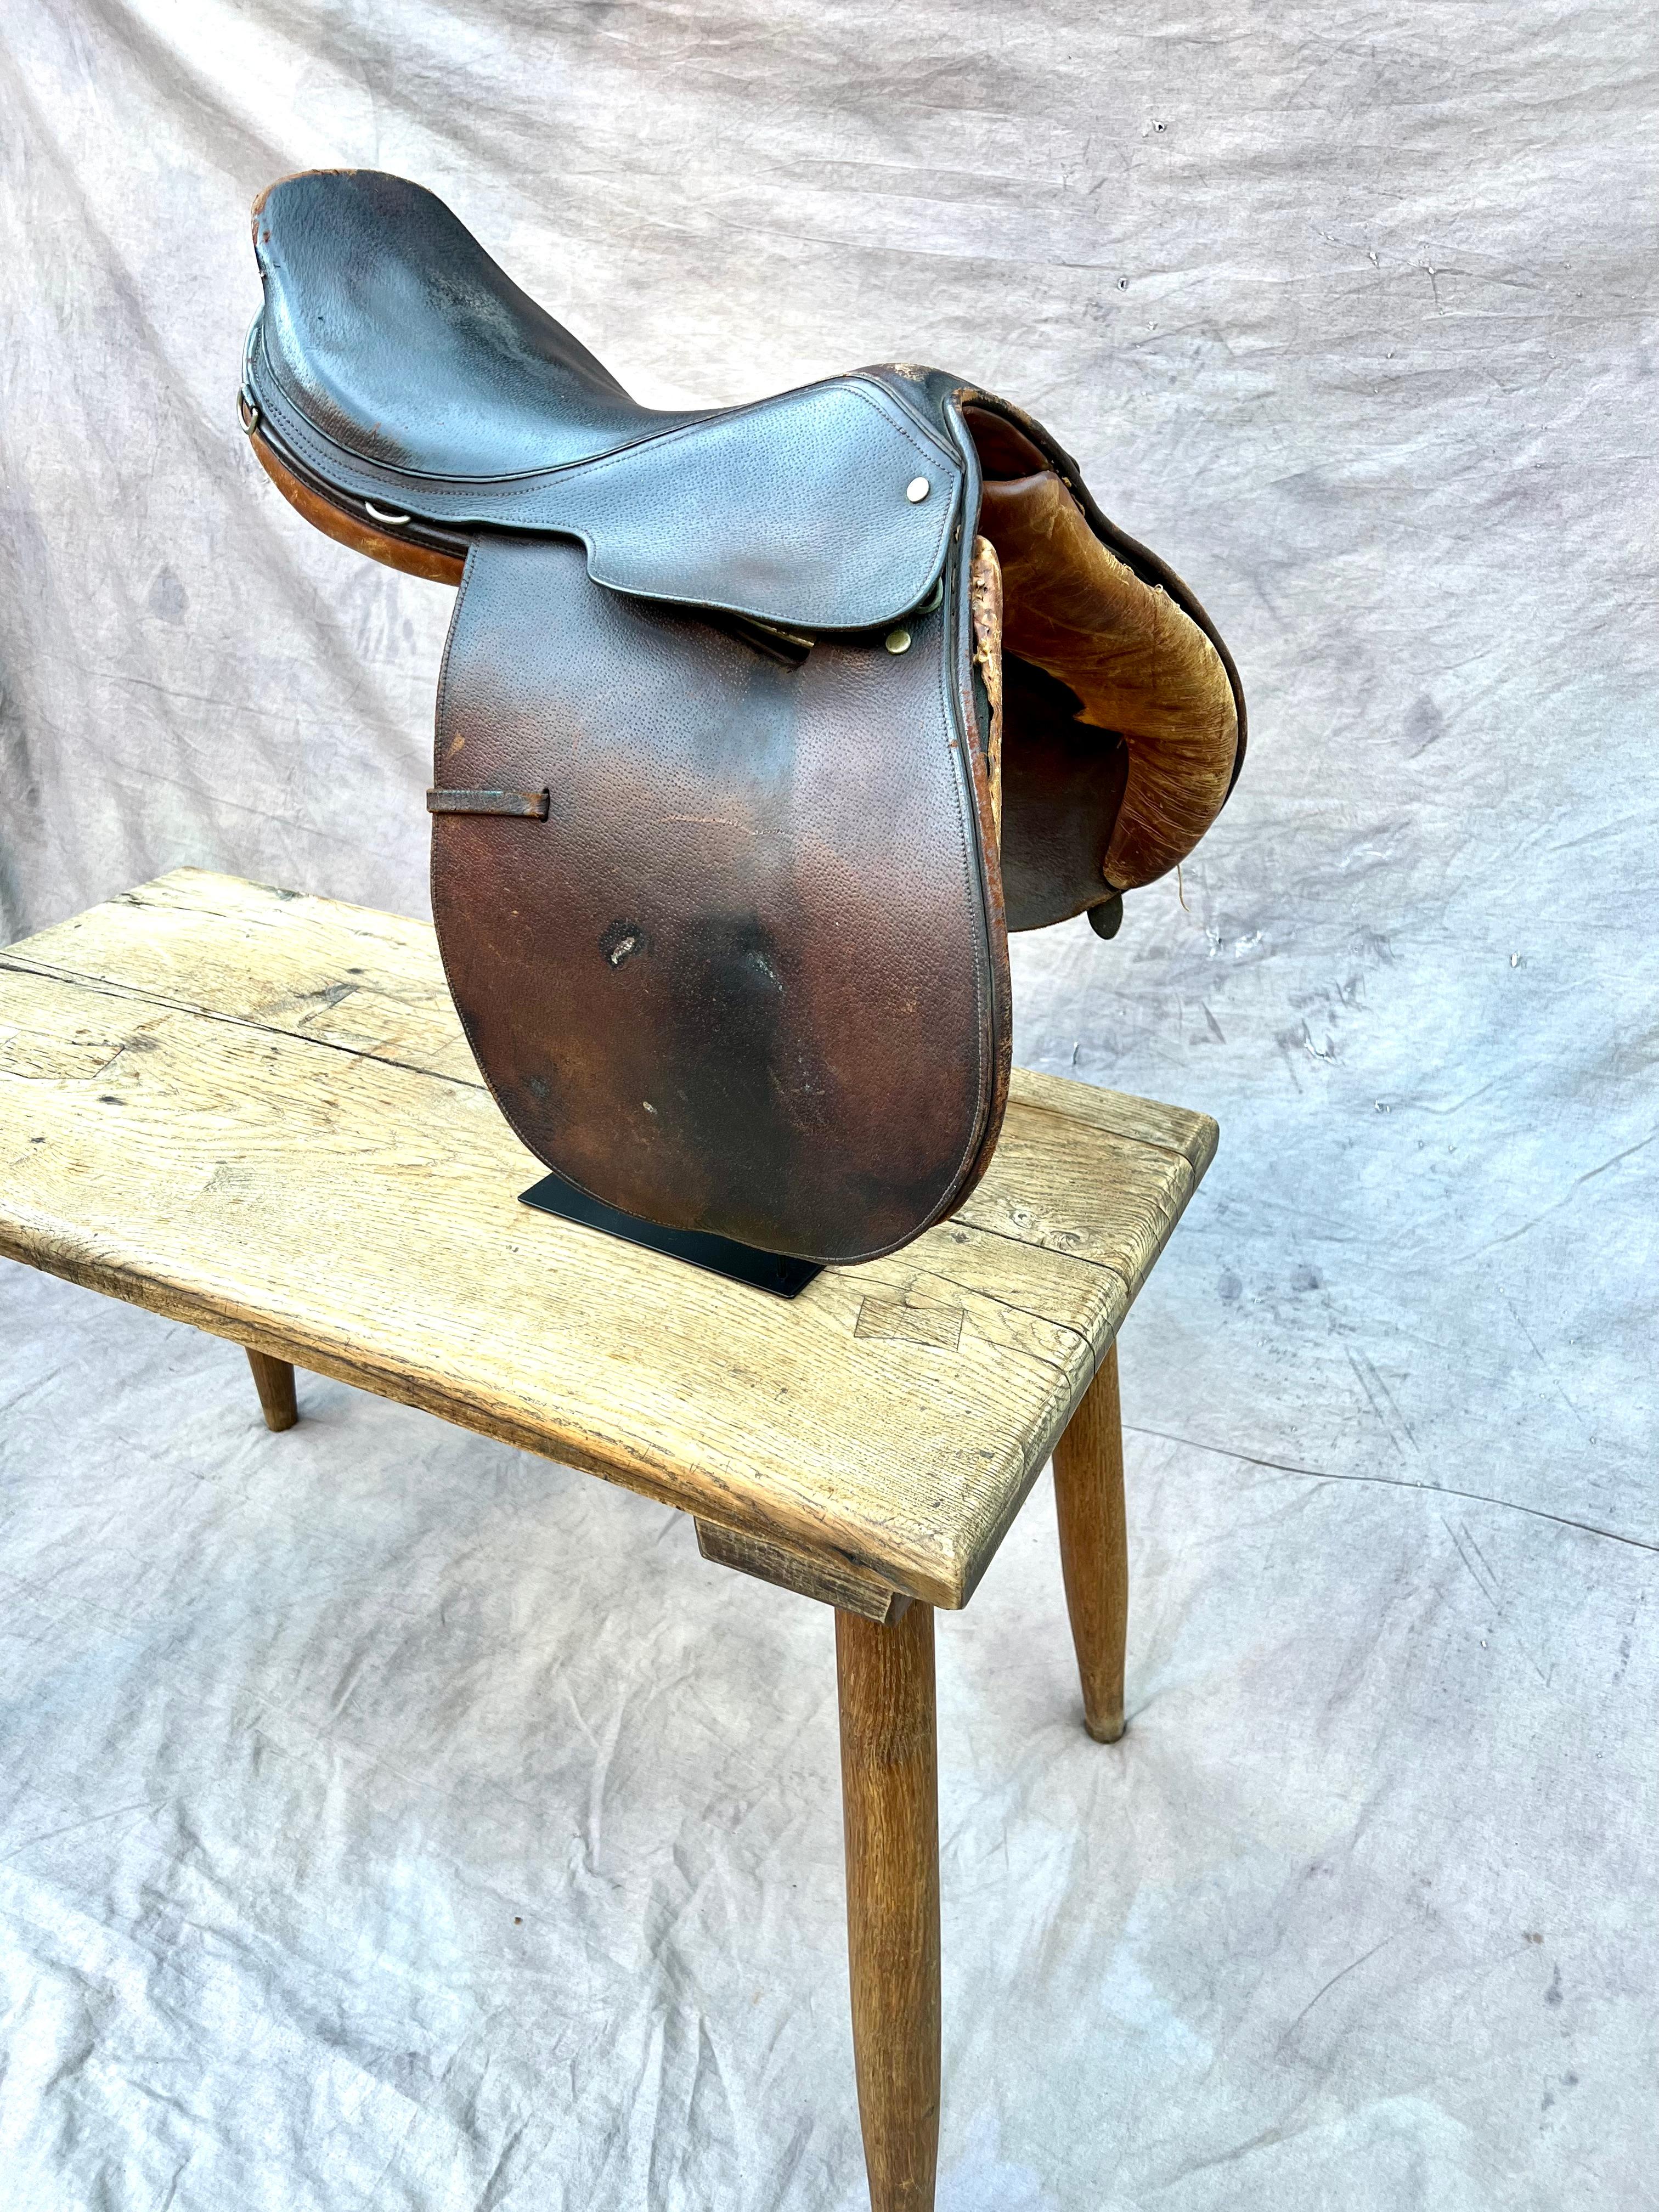 A wonderful English riding saddle in leather - a compliment to many interiors especially those with a Rustic or Ralph Lauren environment. The piece comes on a stand and works well with many groupings. While the saddle may be practical and working,